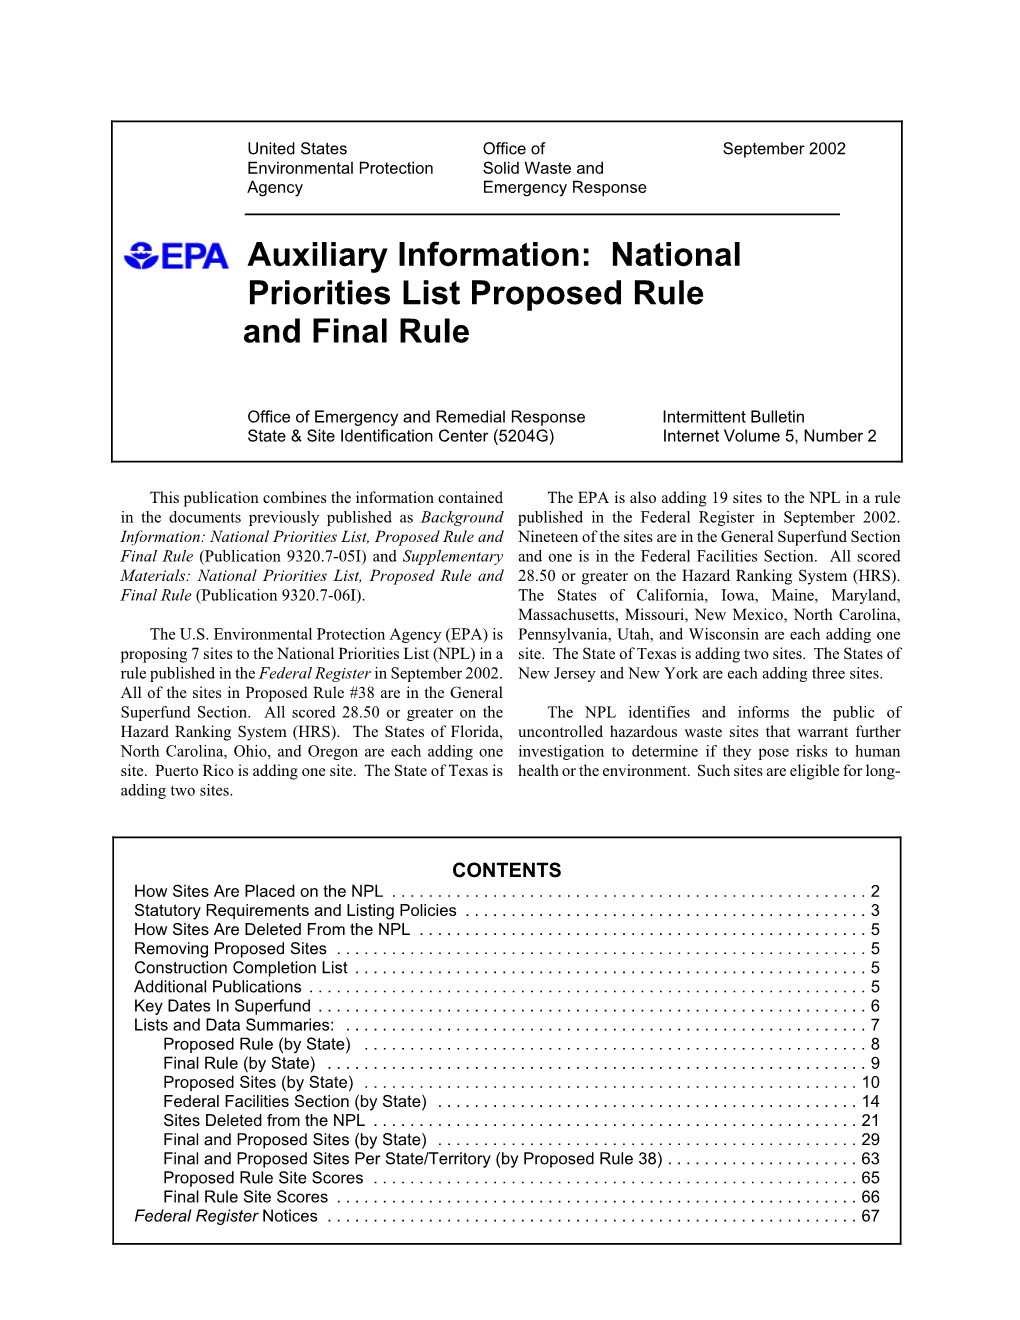 Auxiliary Information: National Priorities List Proposed Rule and Final Rule